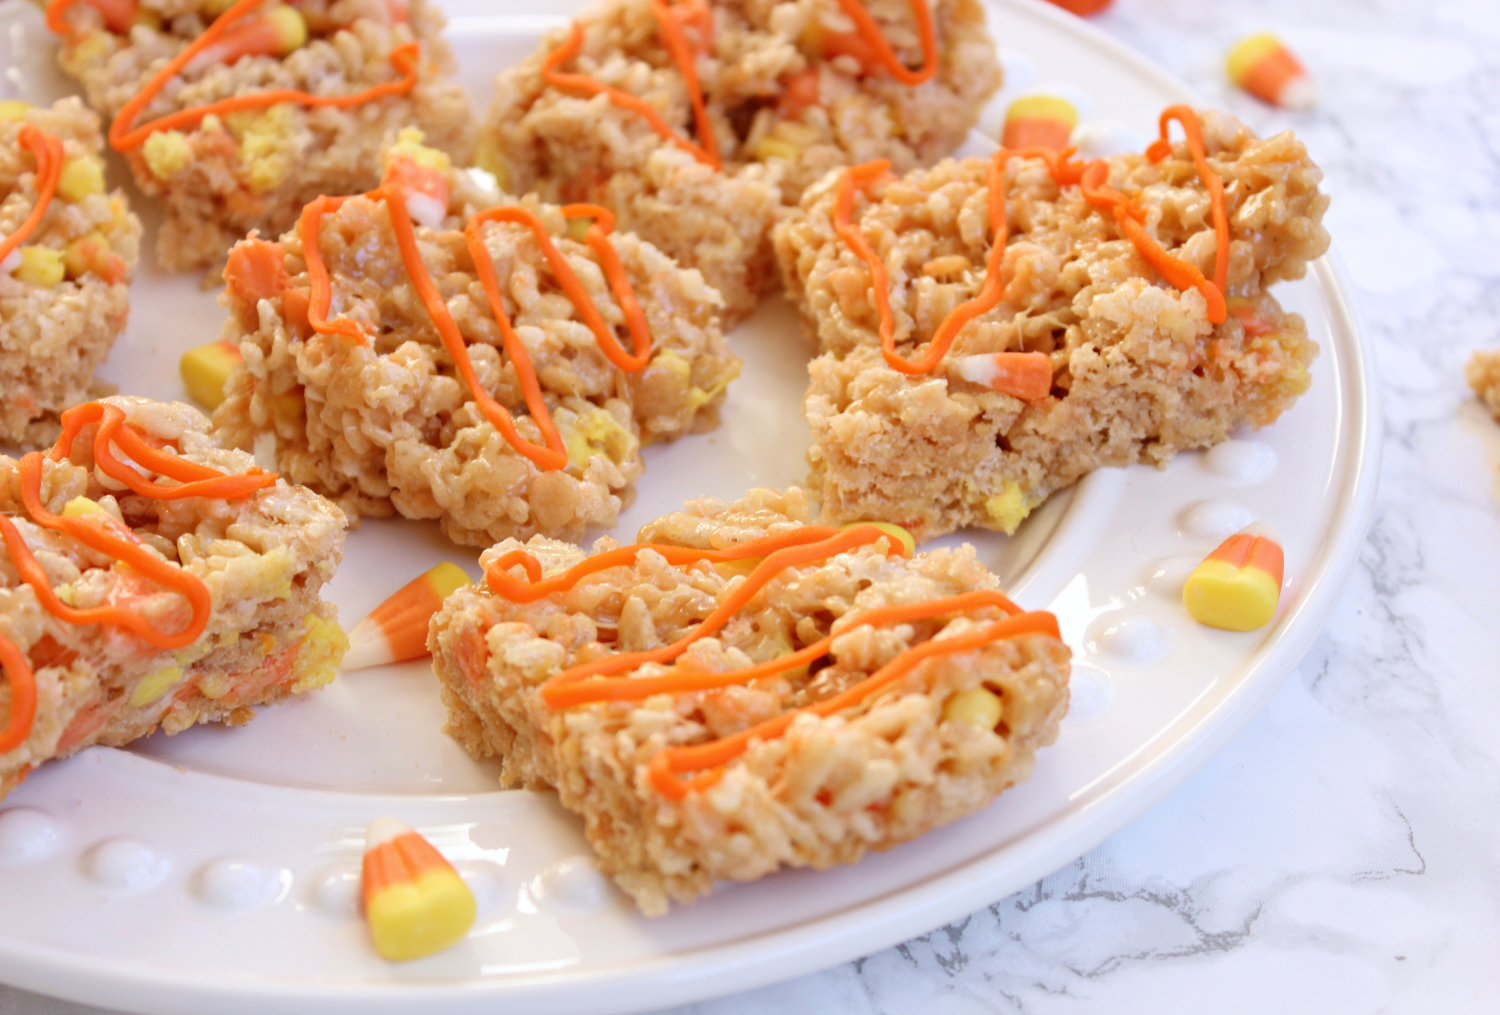 Candy corn rice krispies make a fun, simple, and delicious Halloween snack